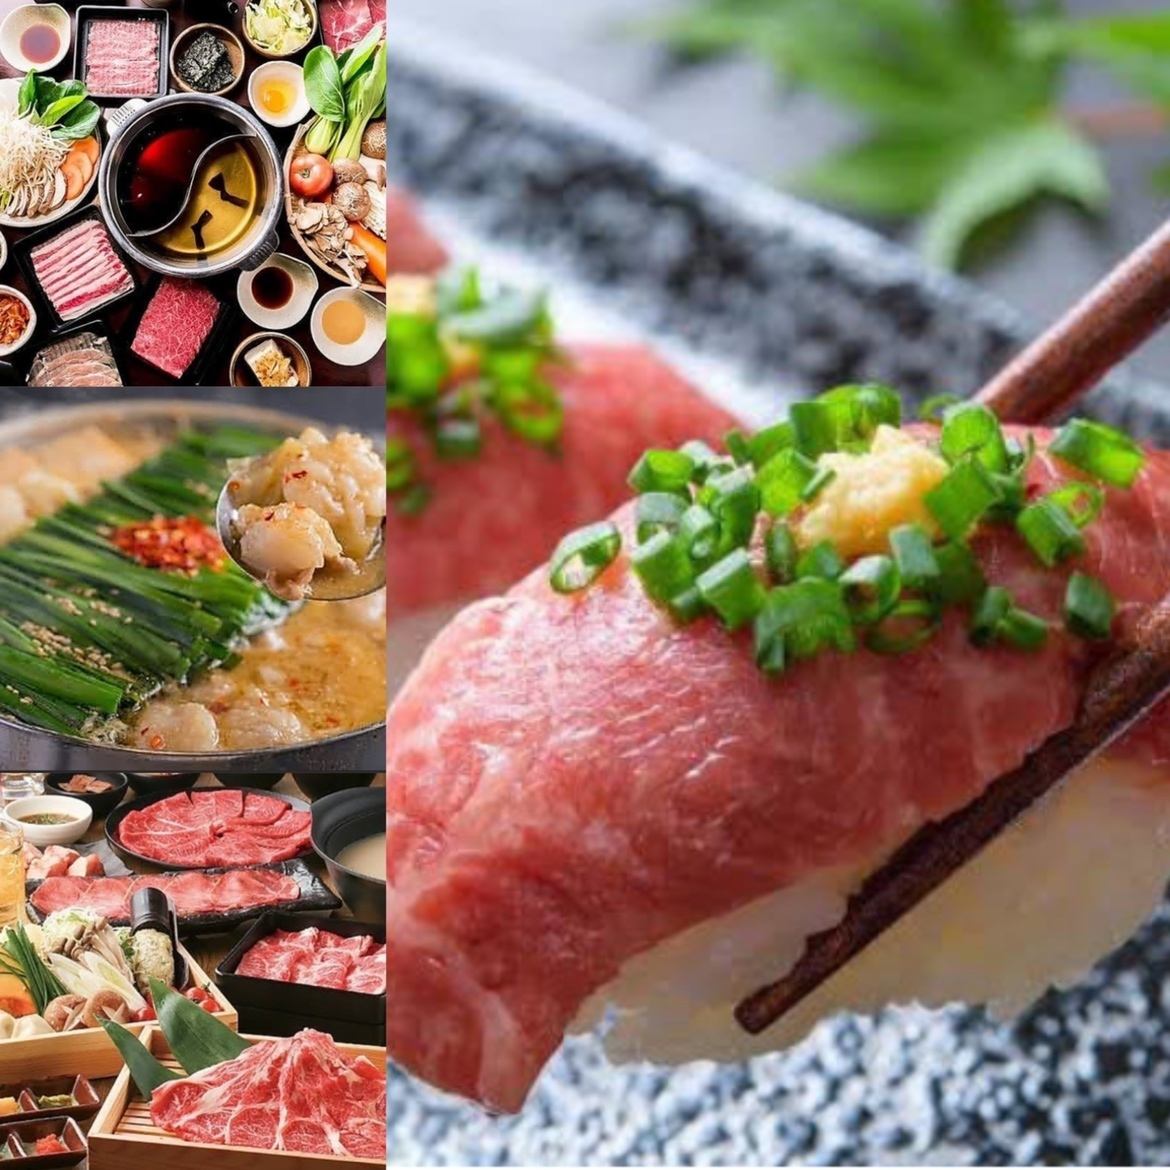 [Exquisite] Domestic beef and pork shabu-shabu and meat sushi are irresistibly delicious